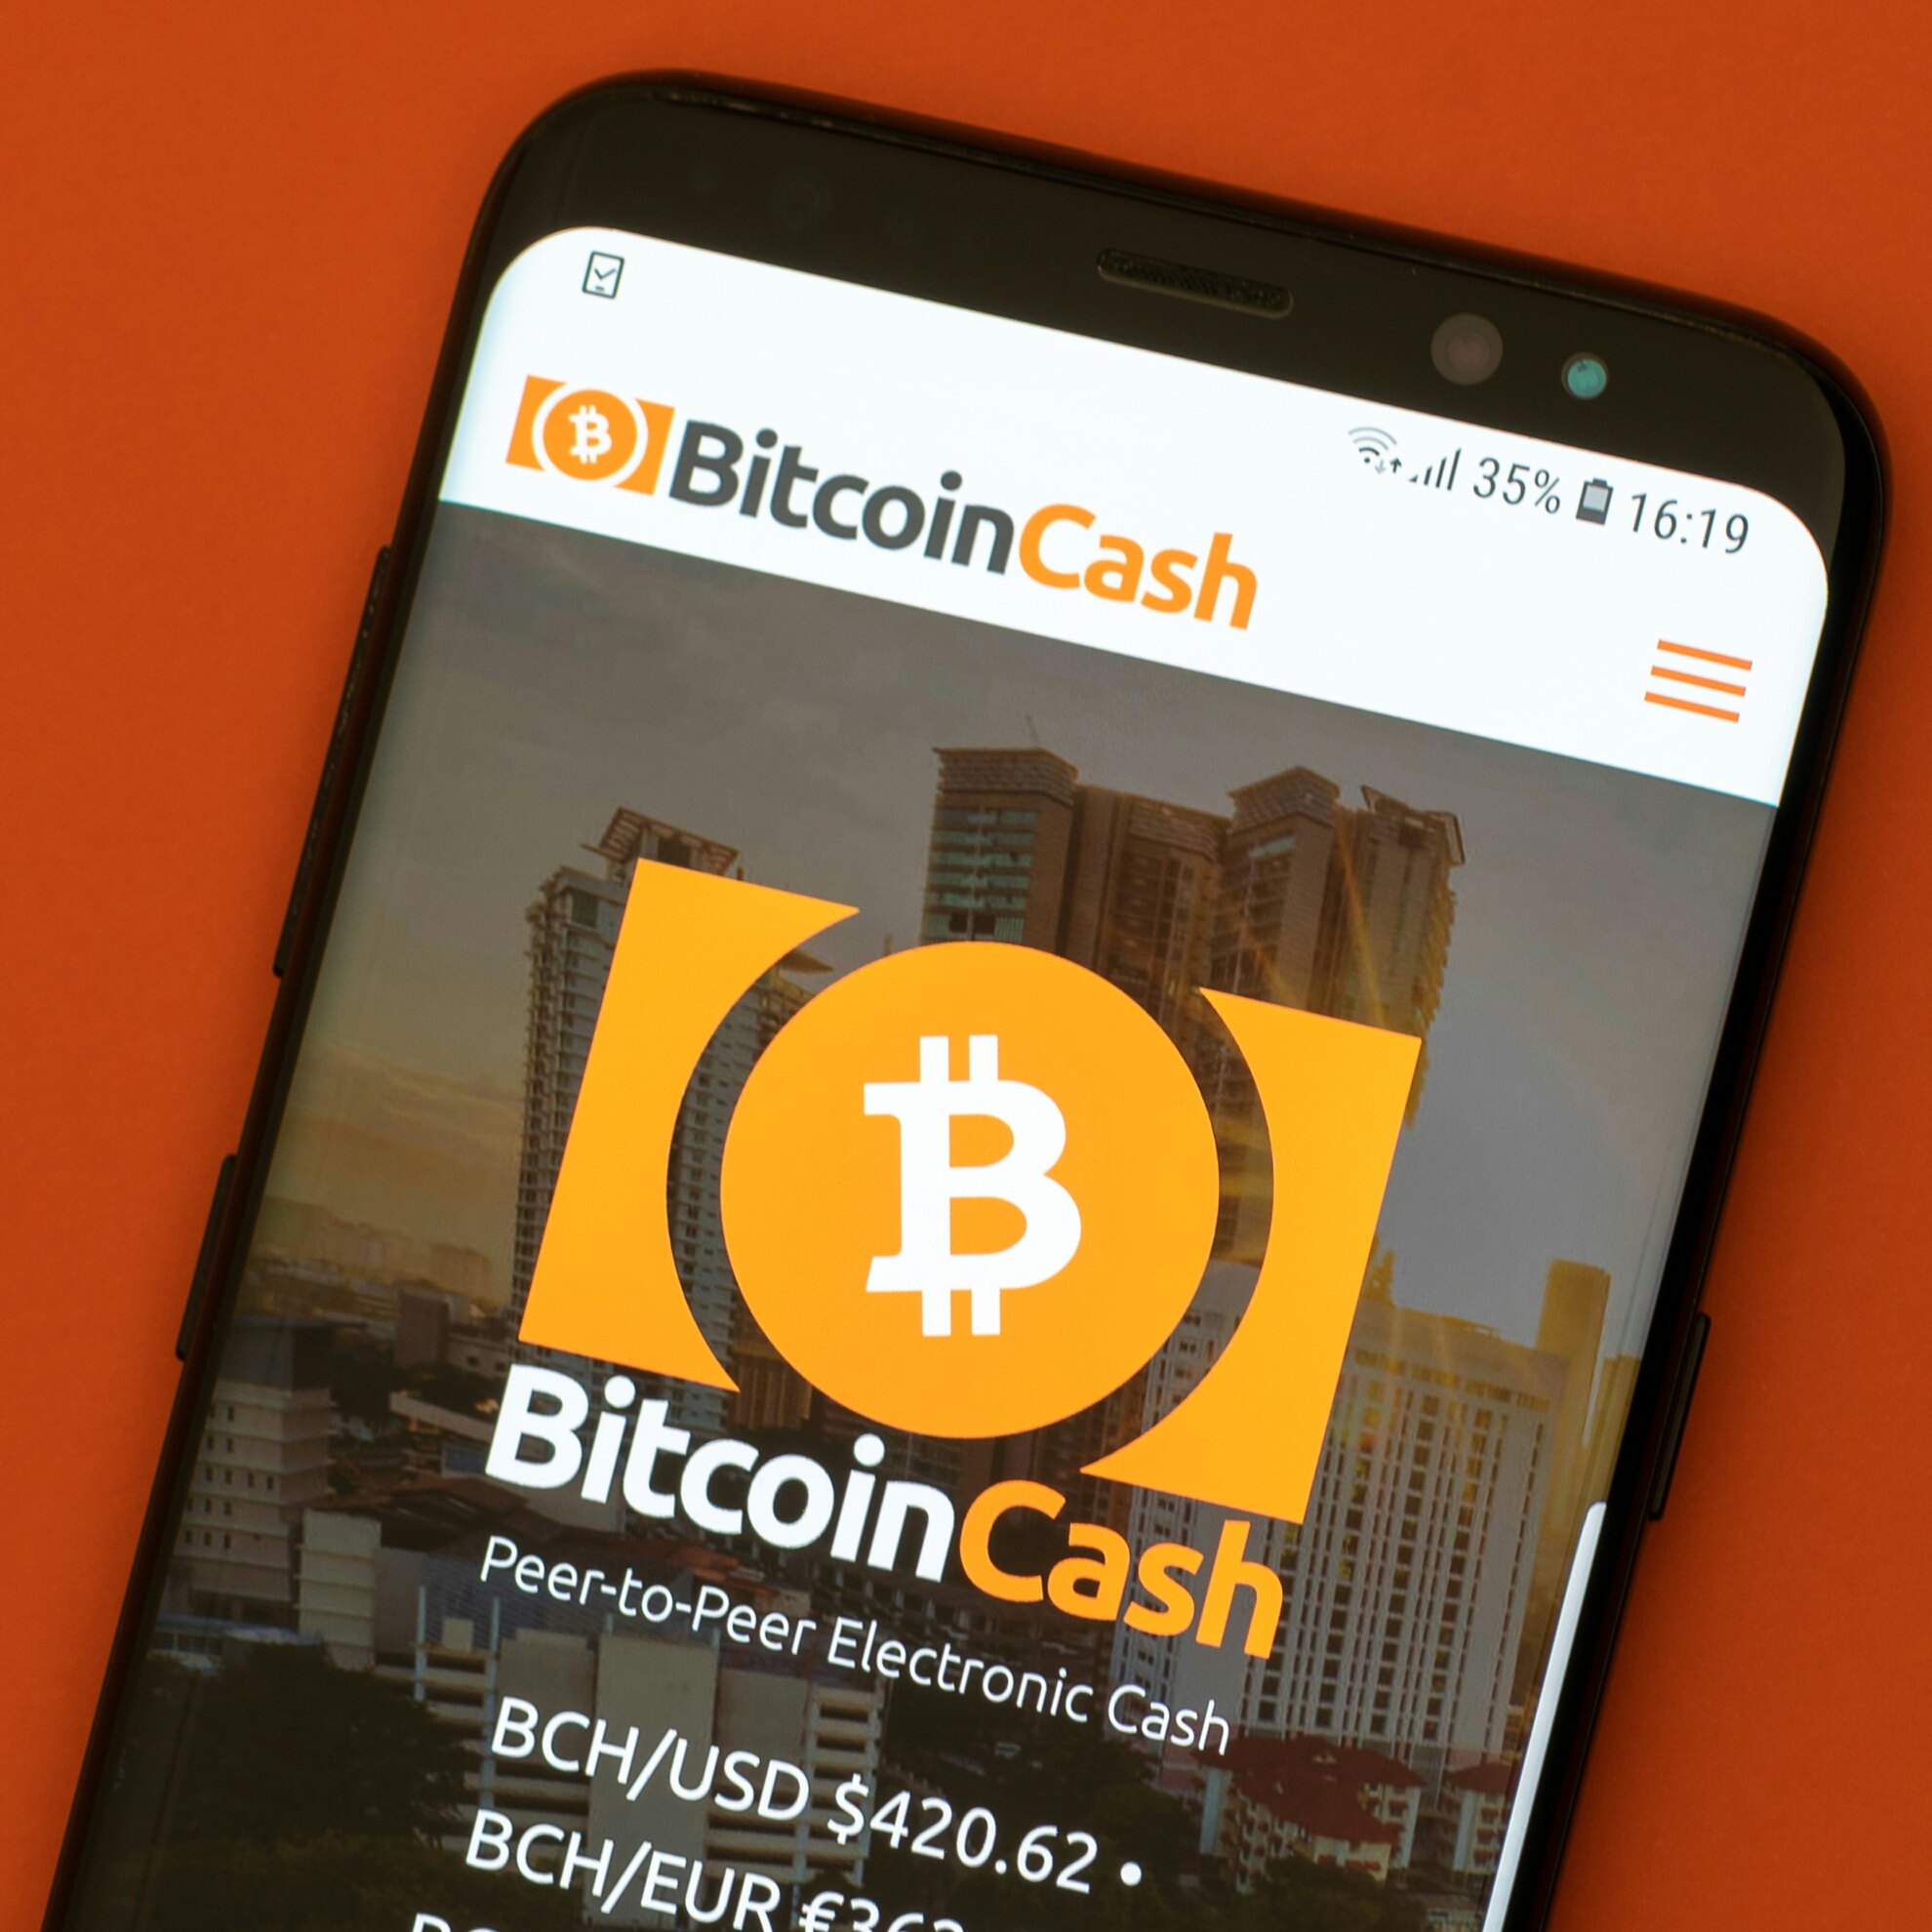 Is there a bitcoin cash wallet курс обмена биткоин в волгограде